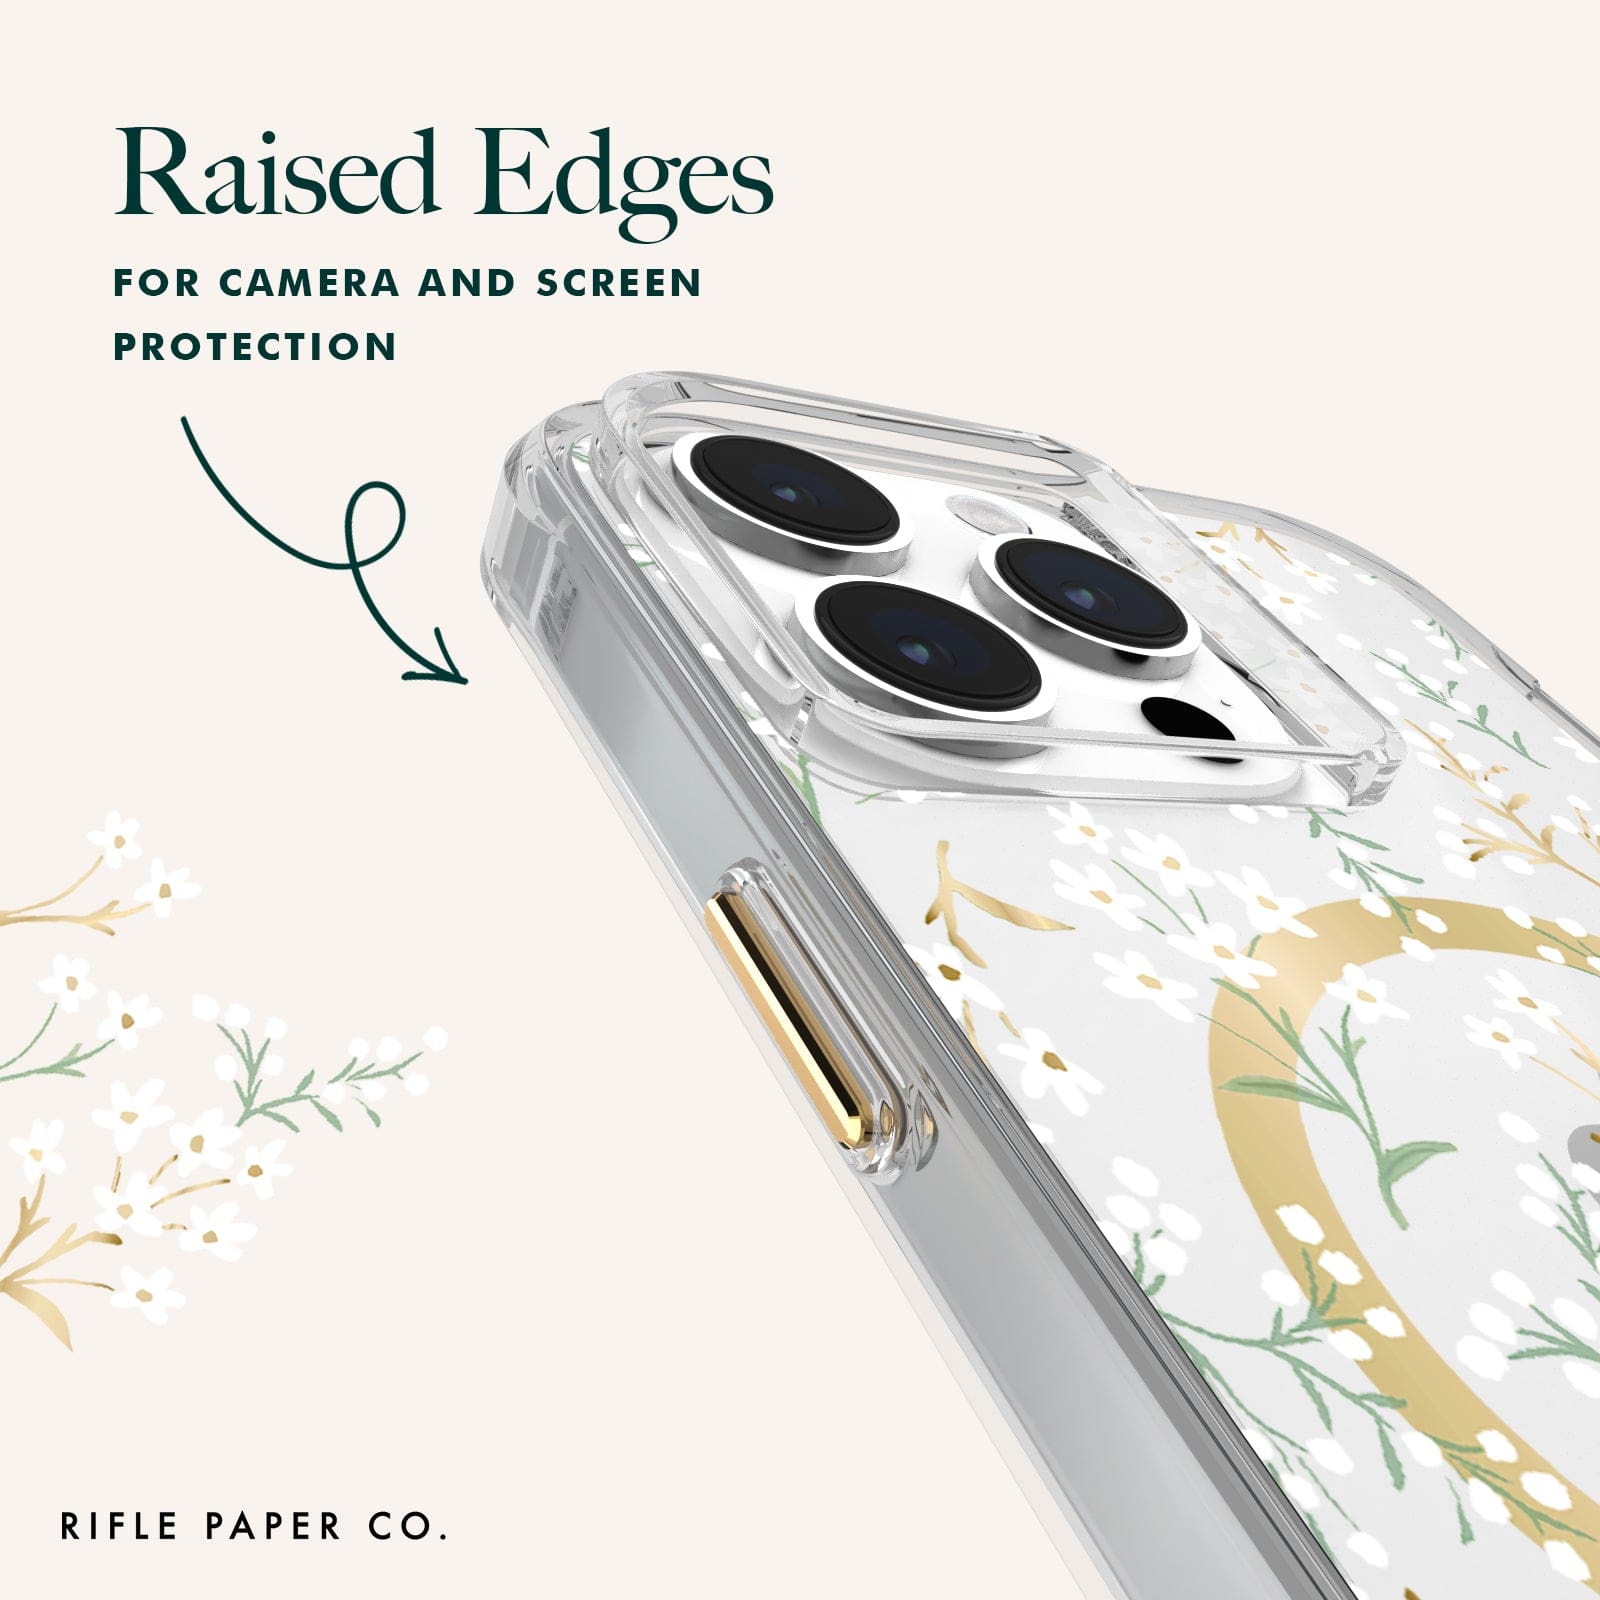 RAISED EDGES FOR CAMERA AND SCREEN PROTECTION.